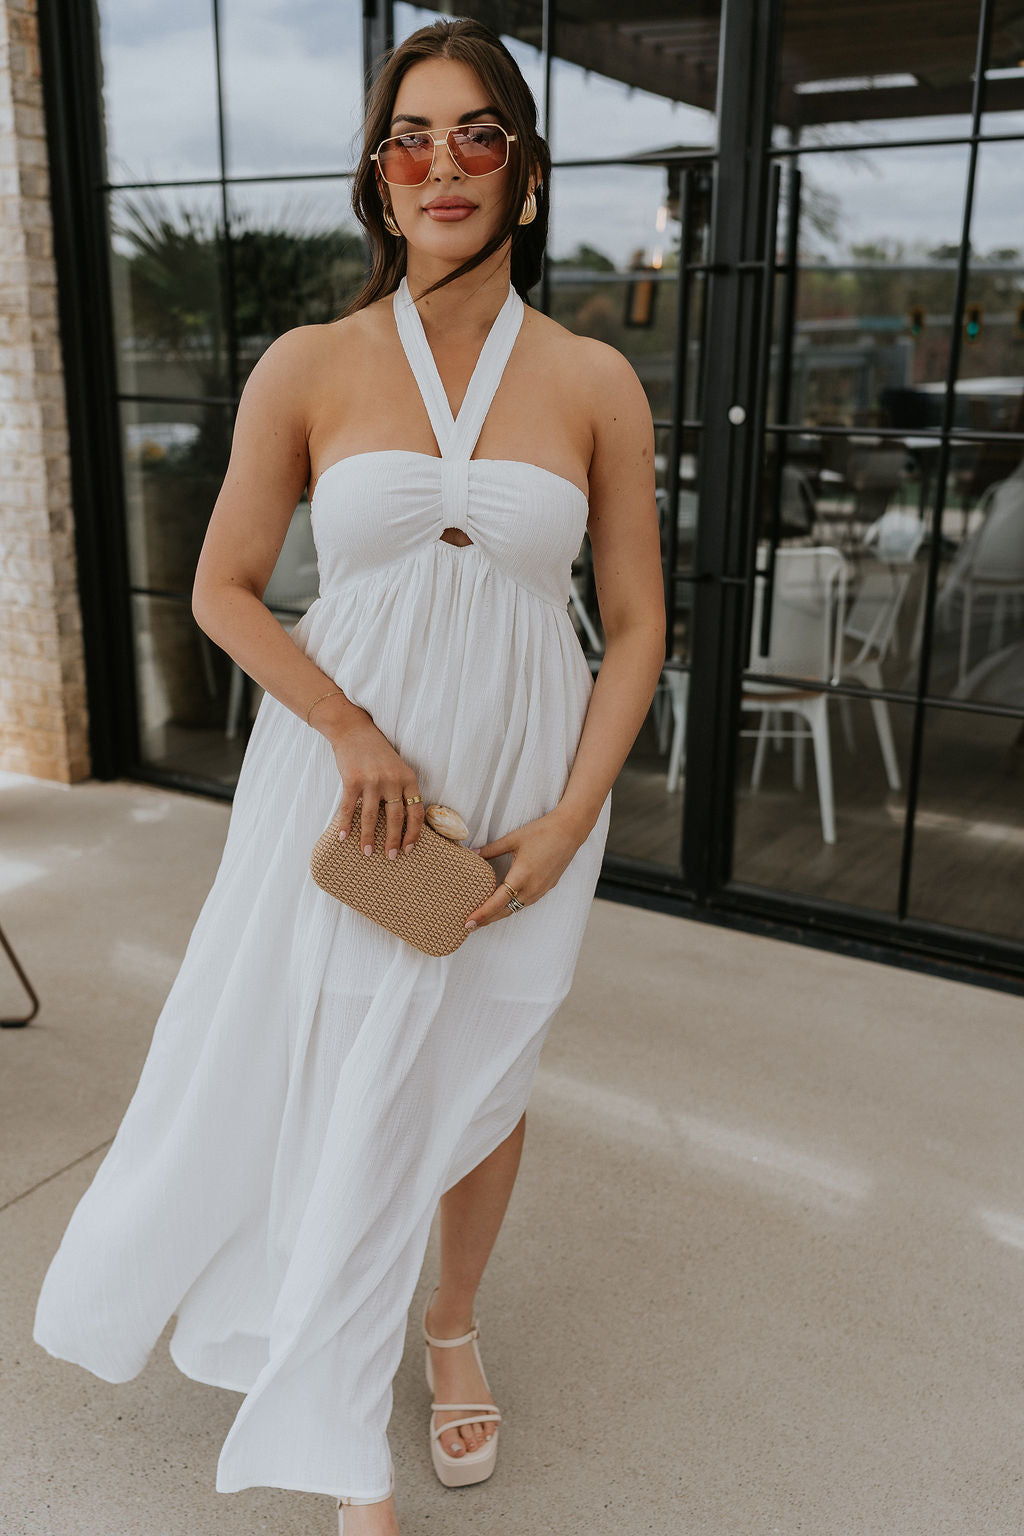 Full body view of female model wearing the Lina Off White Halter Neckline Maxi Dress which features White Lightweight Fabric, White Lining, Maxi Length, Slit Detail, Halter Tie Neckline with Key Hole Detail and Elastic Back